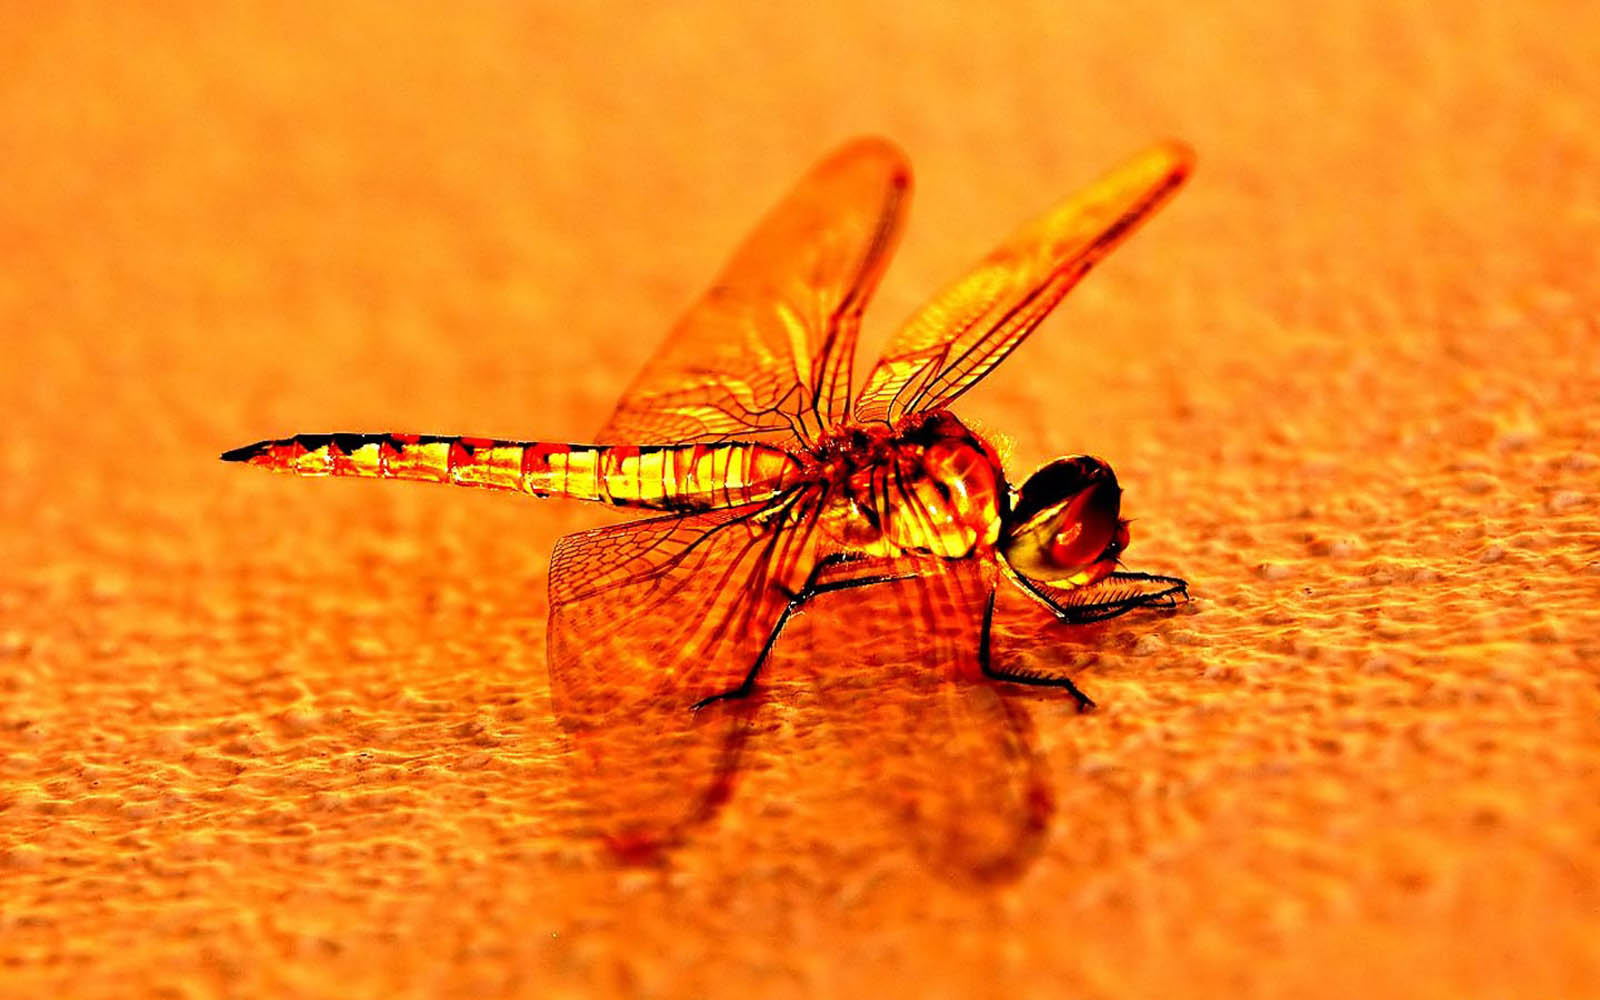 Wallpapers Dragonfly Wallpapers Afalchi Free images wallpape [afalchi.blogspot.com]